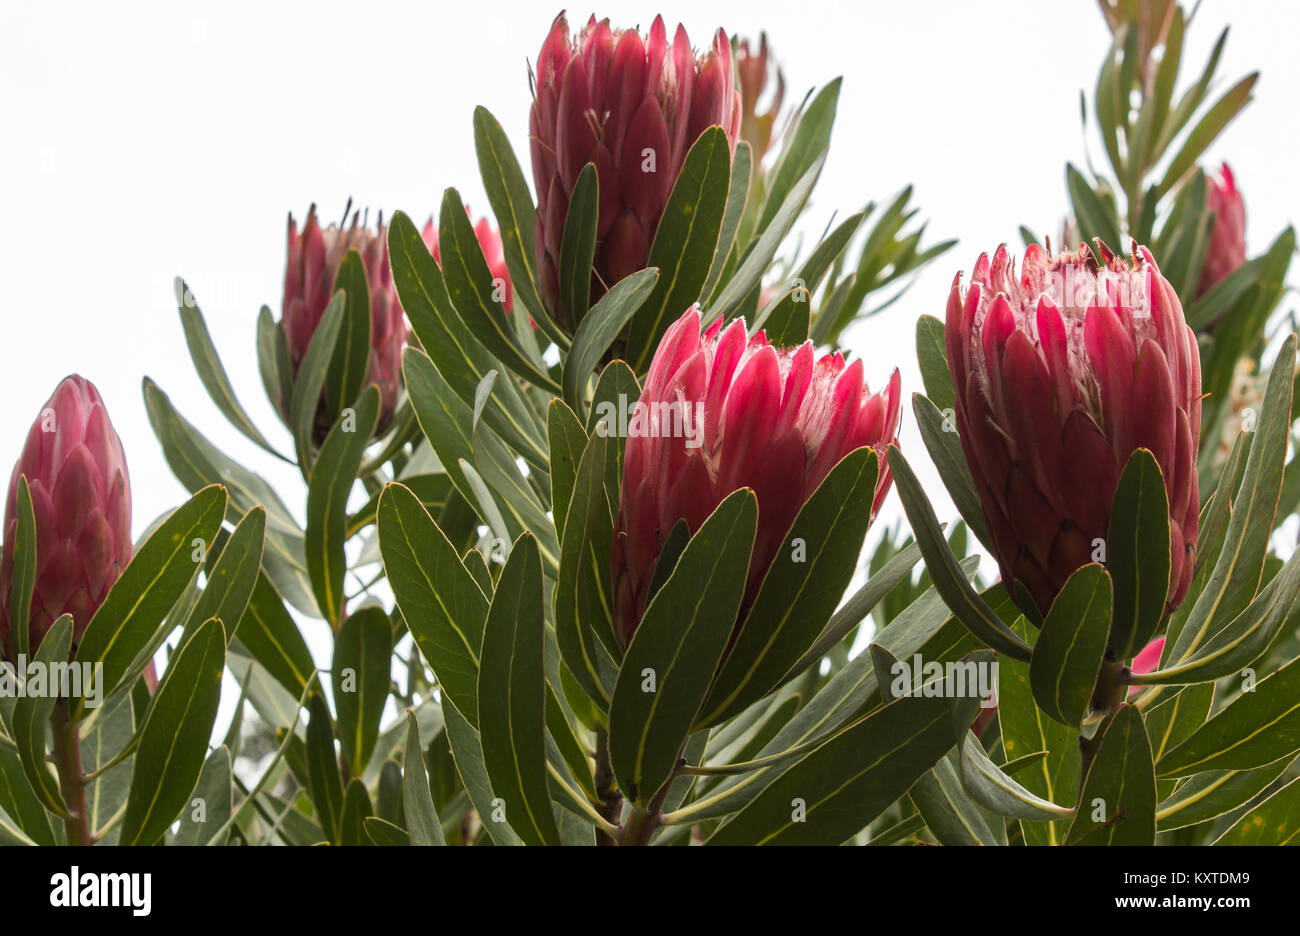 Red large tropical Protea sugarbush flower blossoms against green leaves Stock Photo